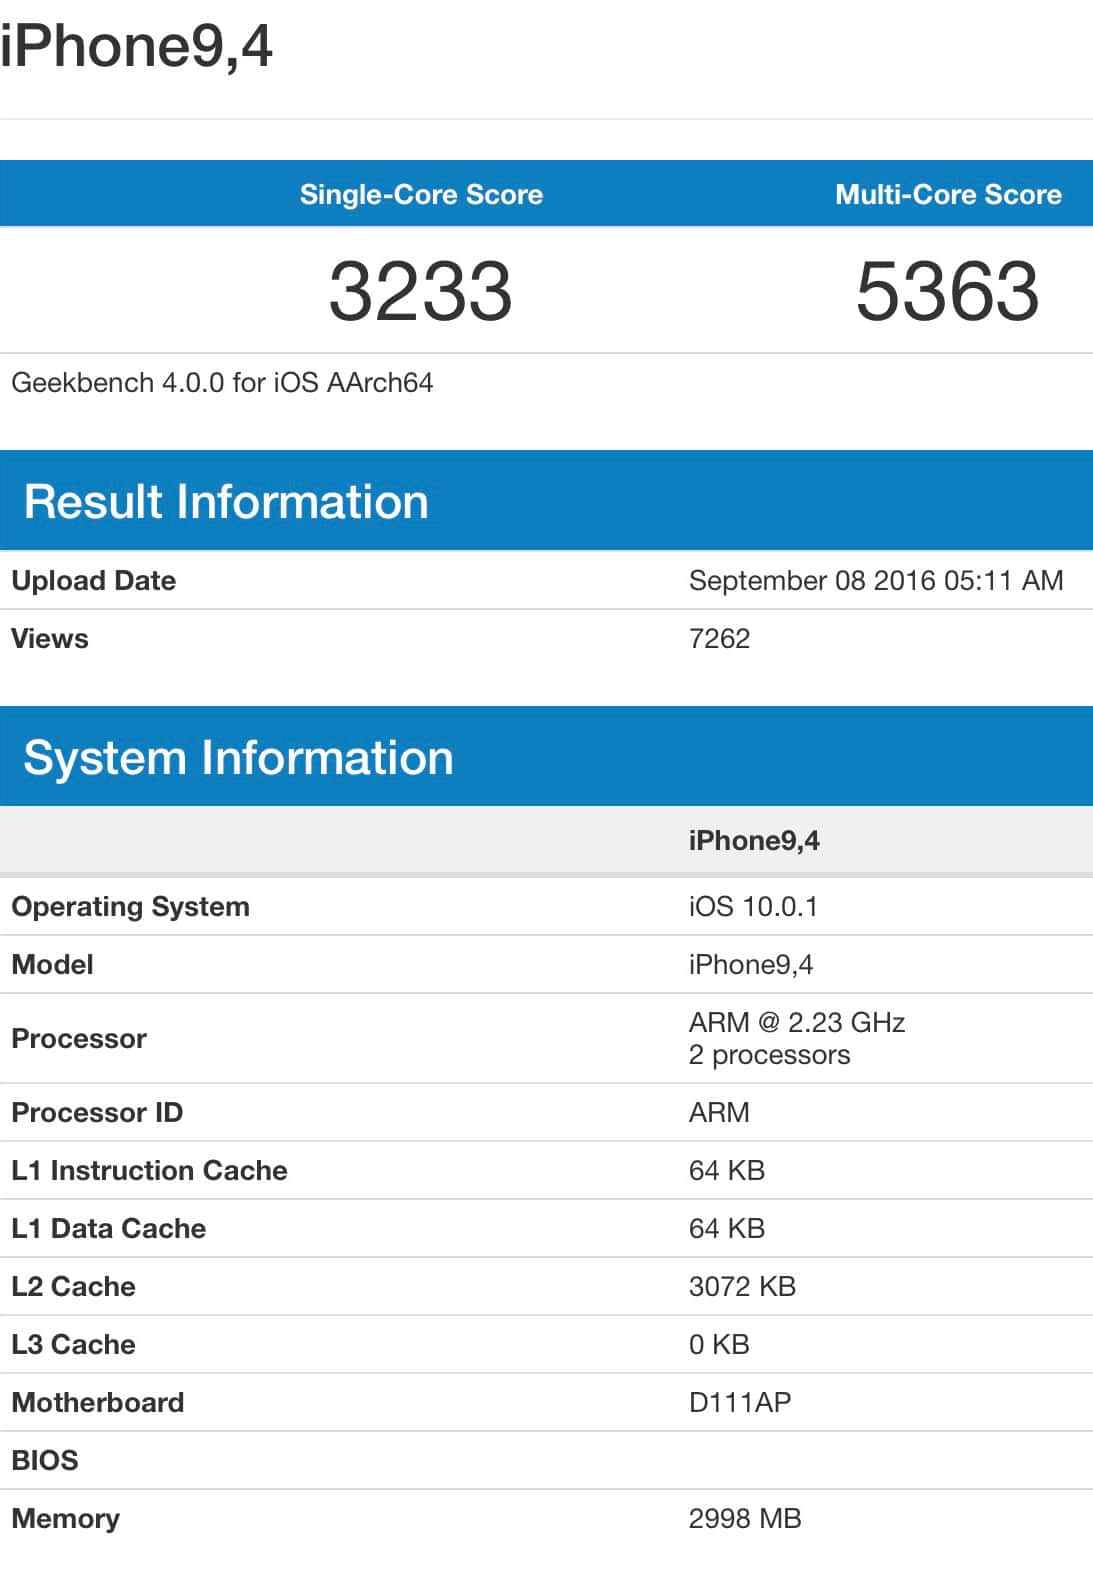 Geekbench Test for iPhone 7 Plus